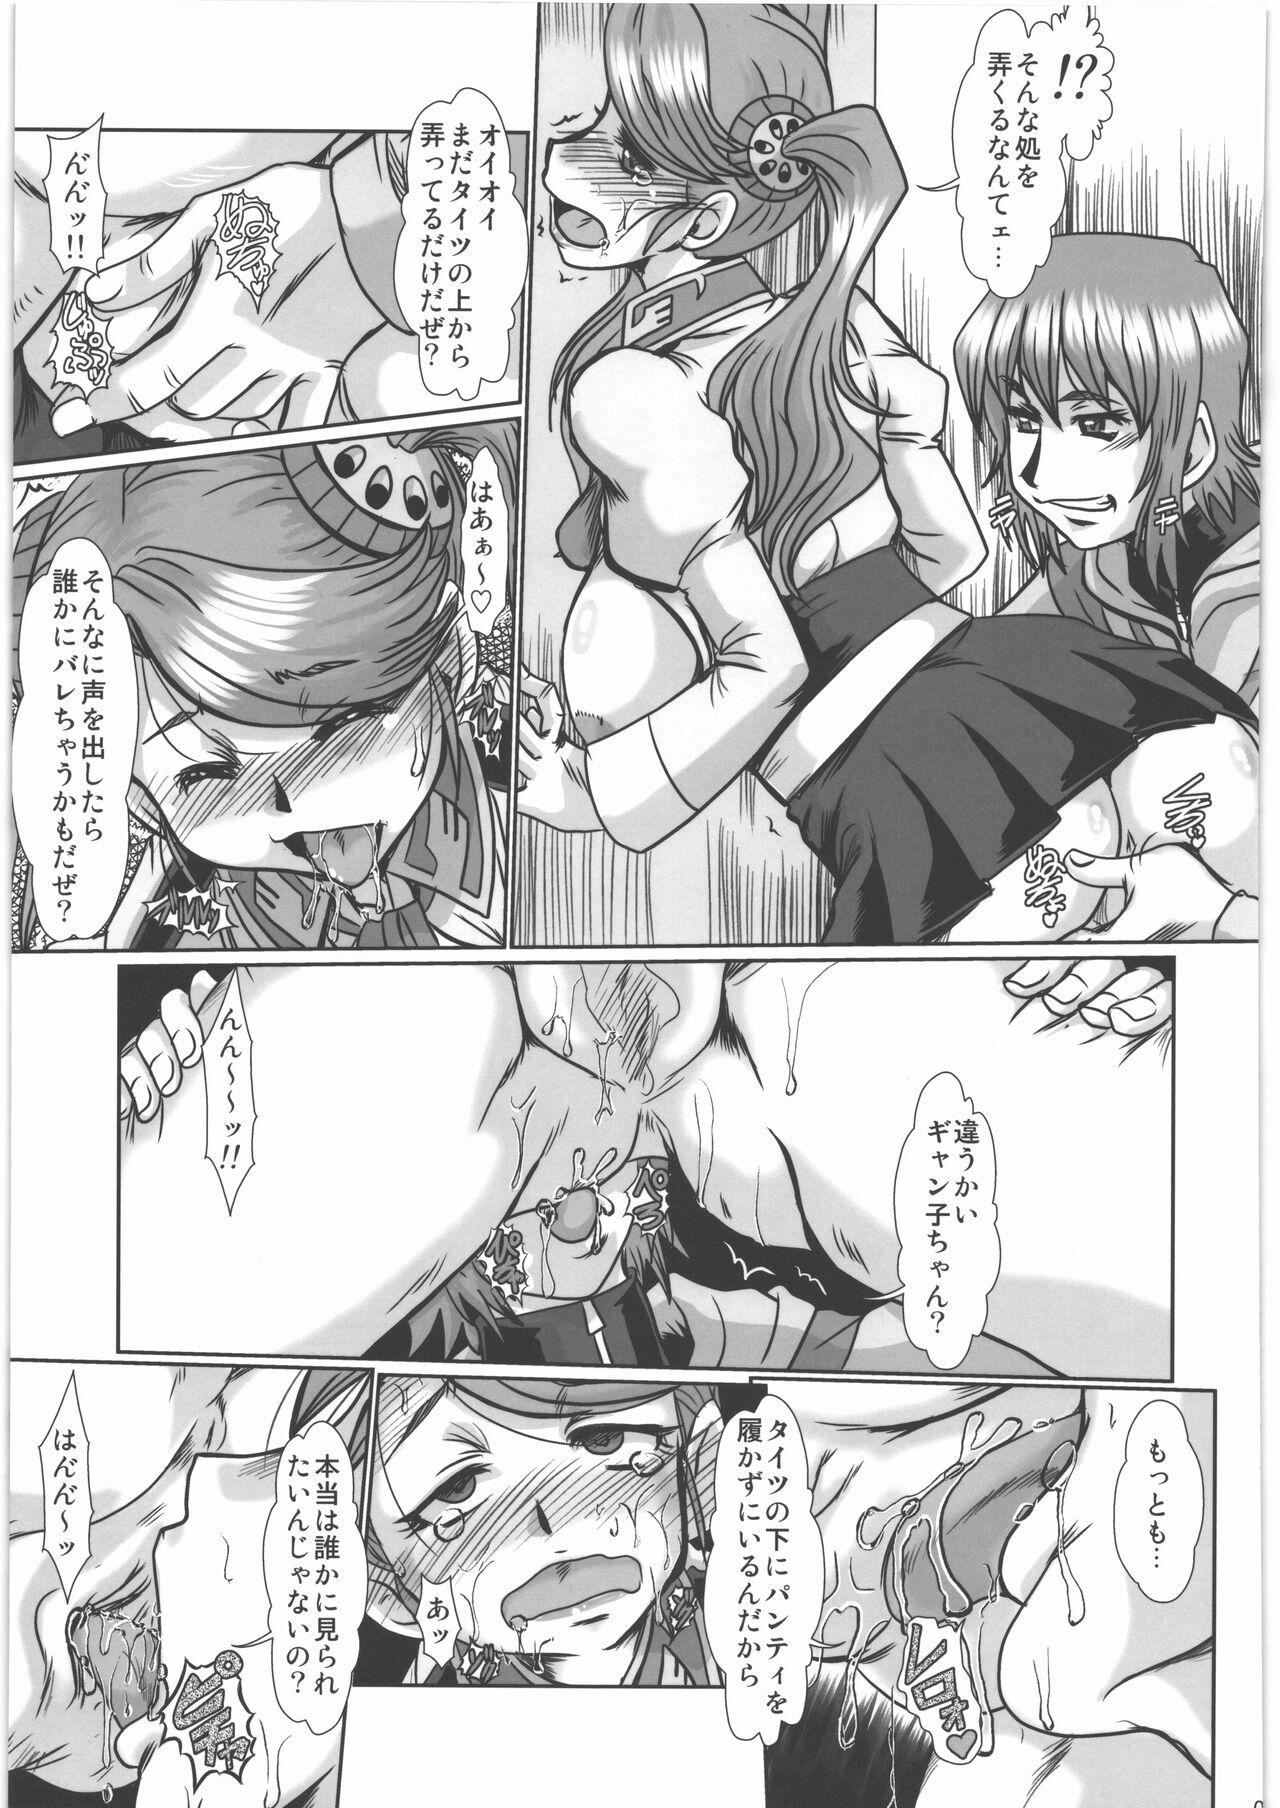 Best Blowjob Ever F-84 - Gundam build fighters try Tied - Page 8